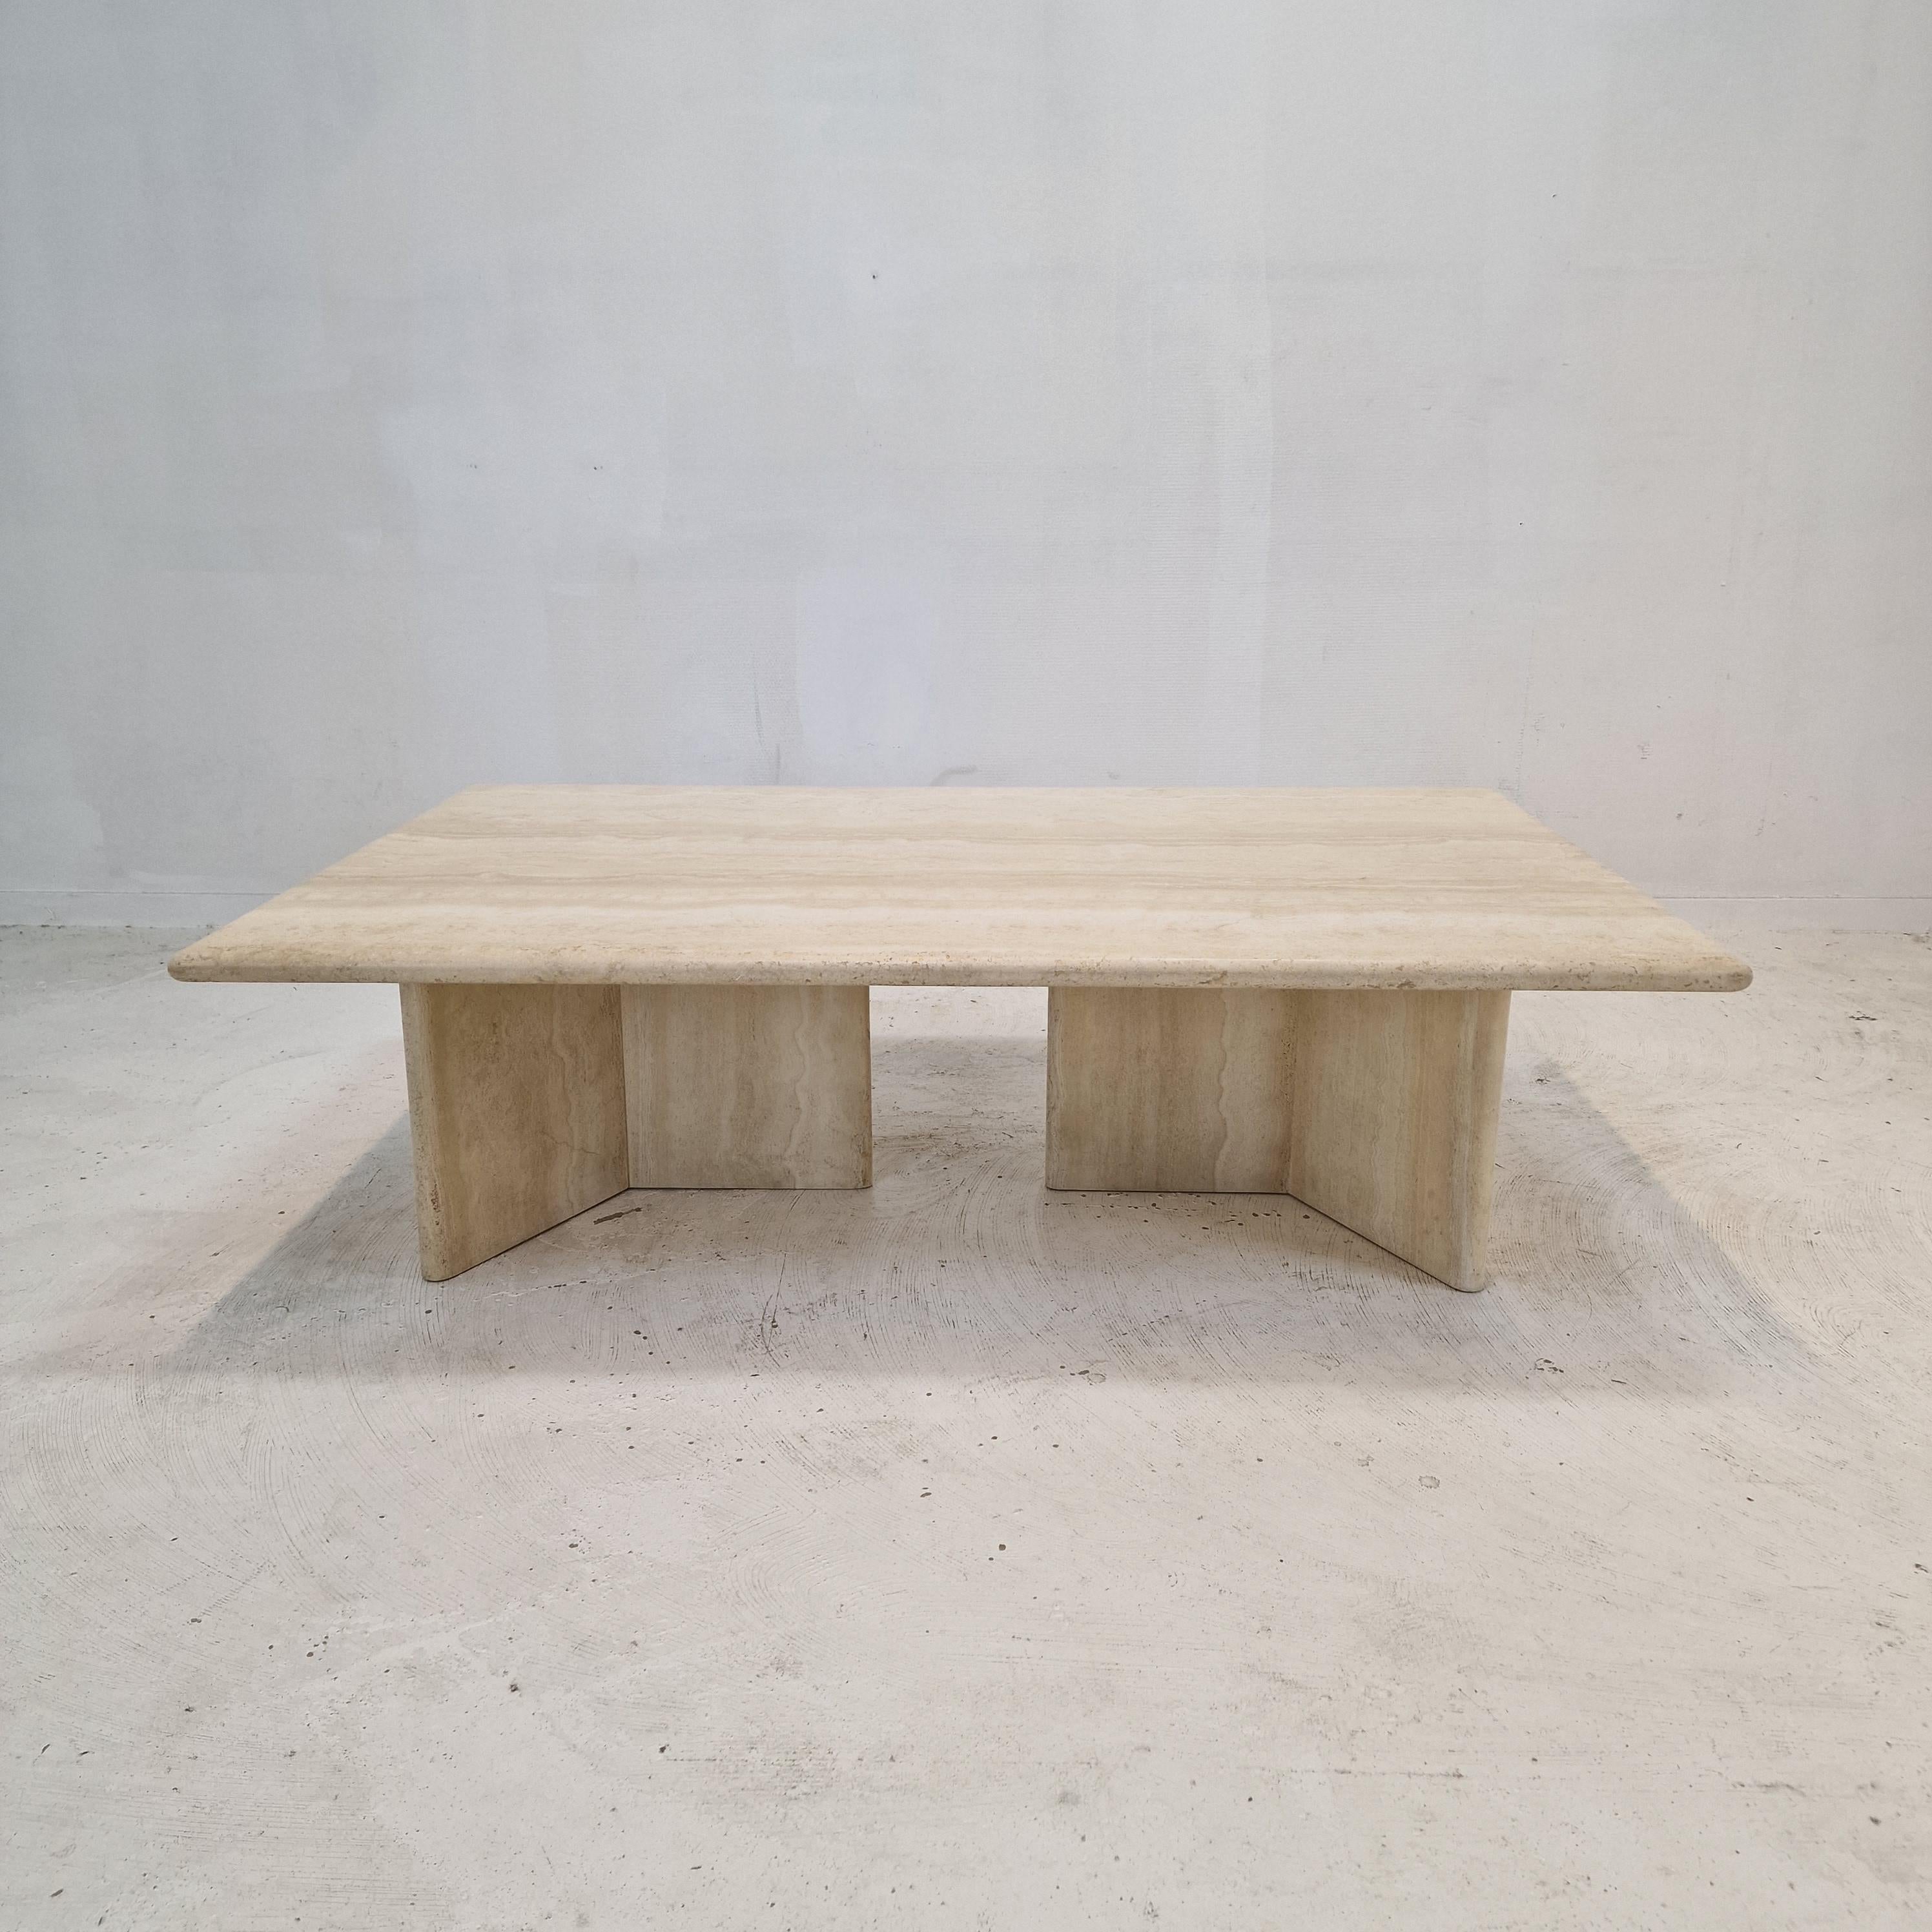 Stunning Italian coffee table handcrafted out of travertine, 1980s.

The beautiful rectangle top is rounded on the edge. 
It is made of beautiful travertine.
Please take notice of the very nice patterns.

It has two very nice 3-point legs,